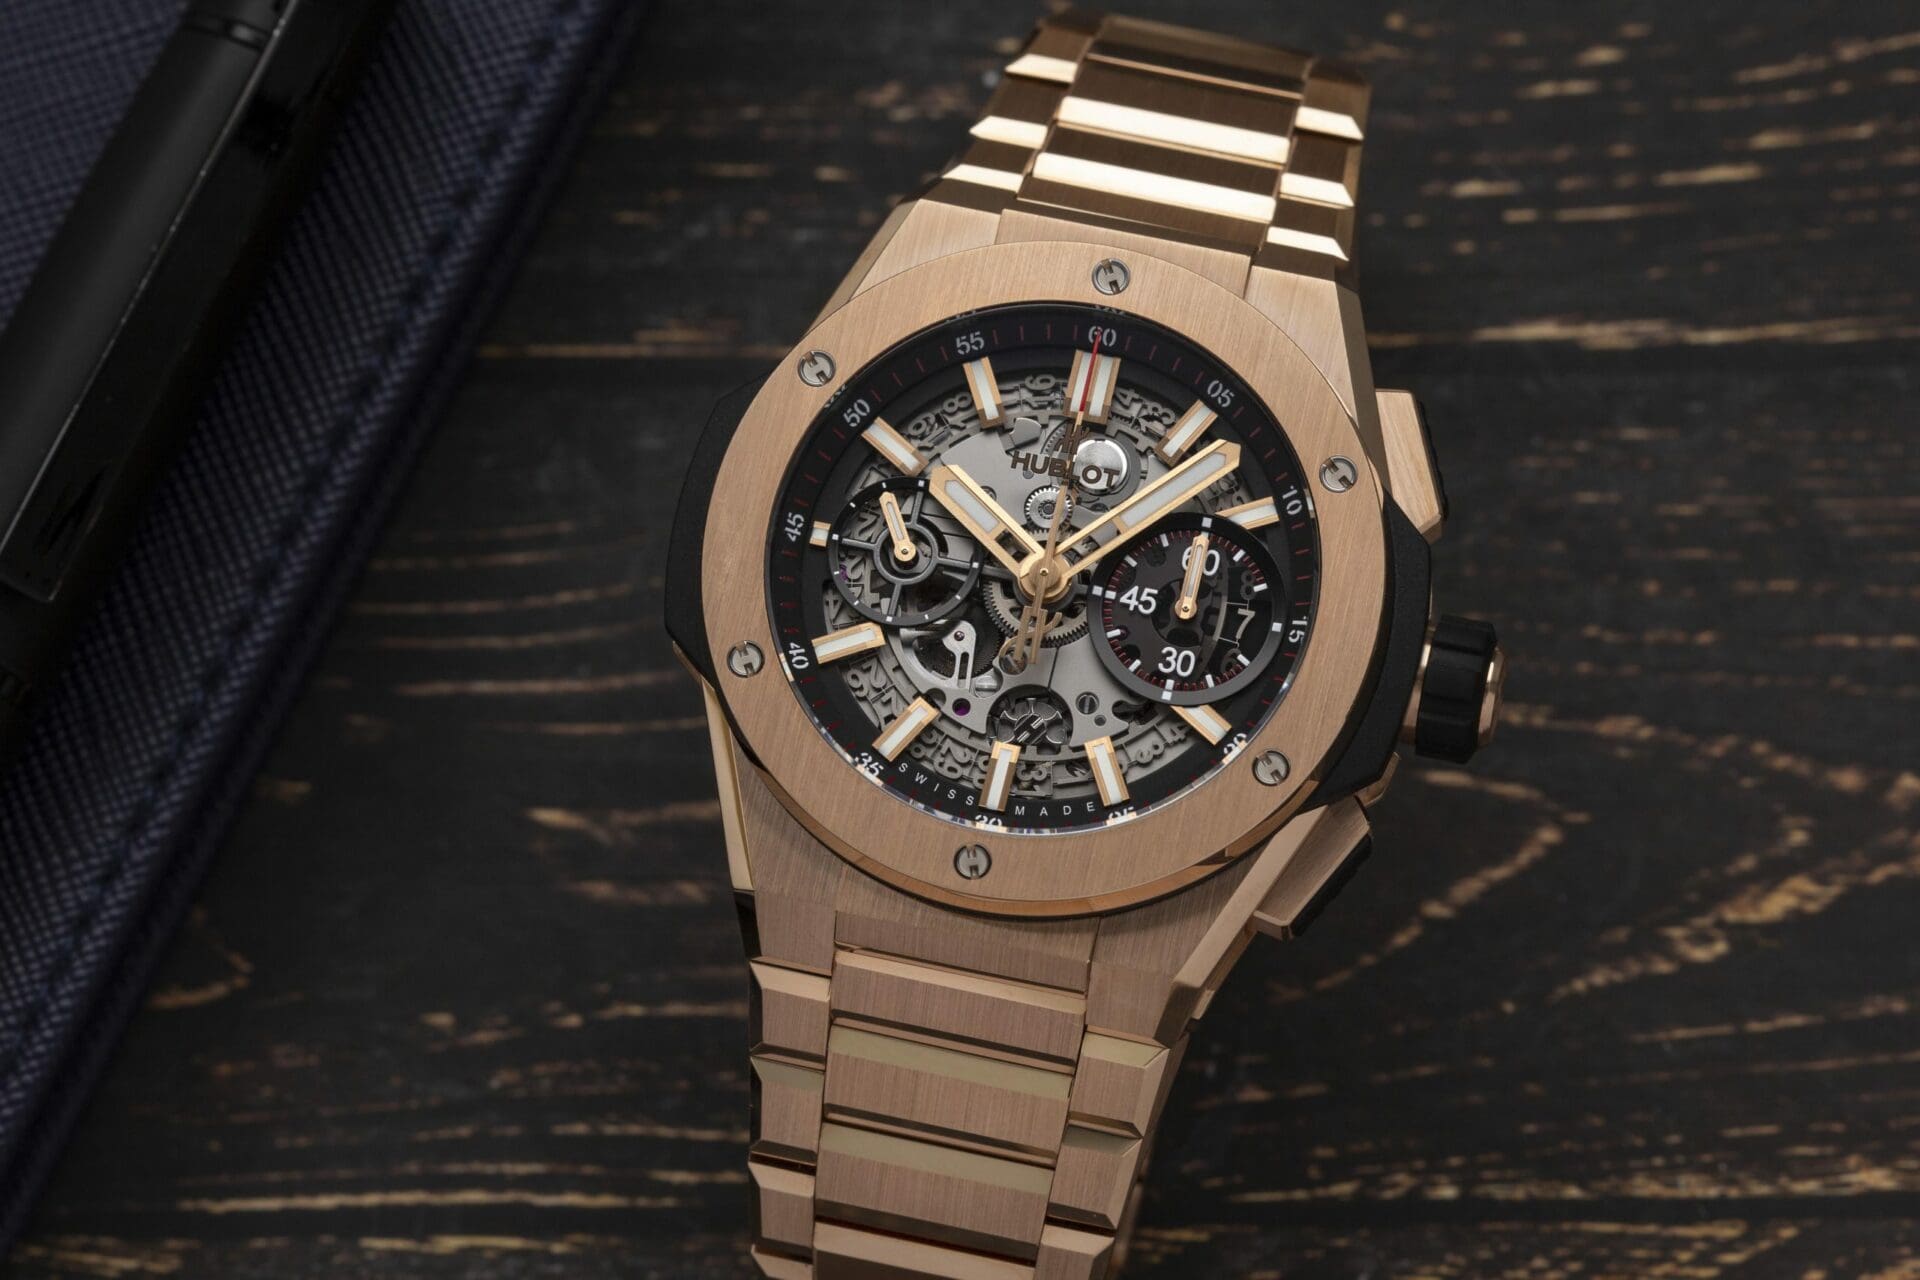 A WEEK ON THE WRIST: The Hublot Big Bang Integral King Gold is a watch ...